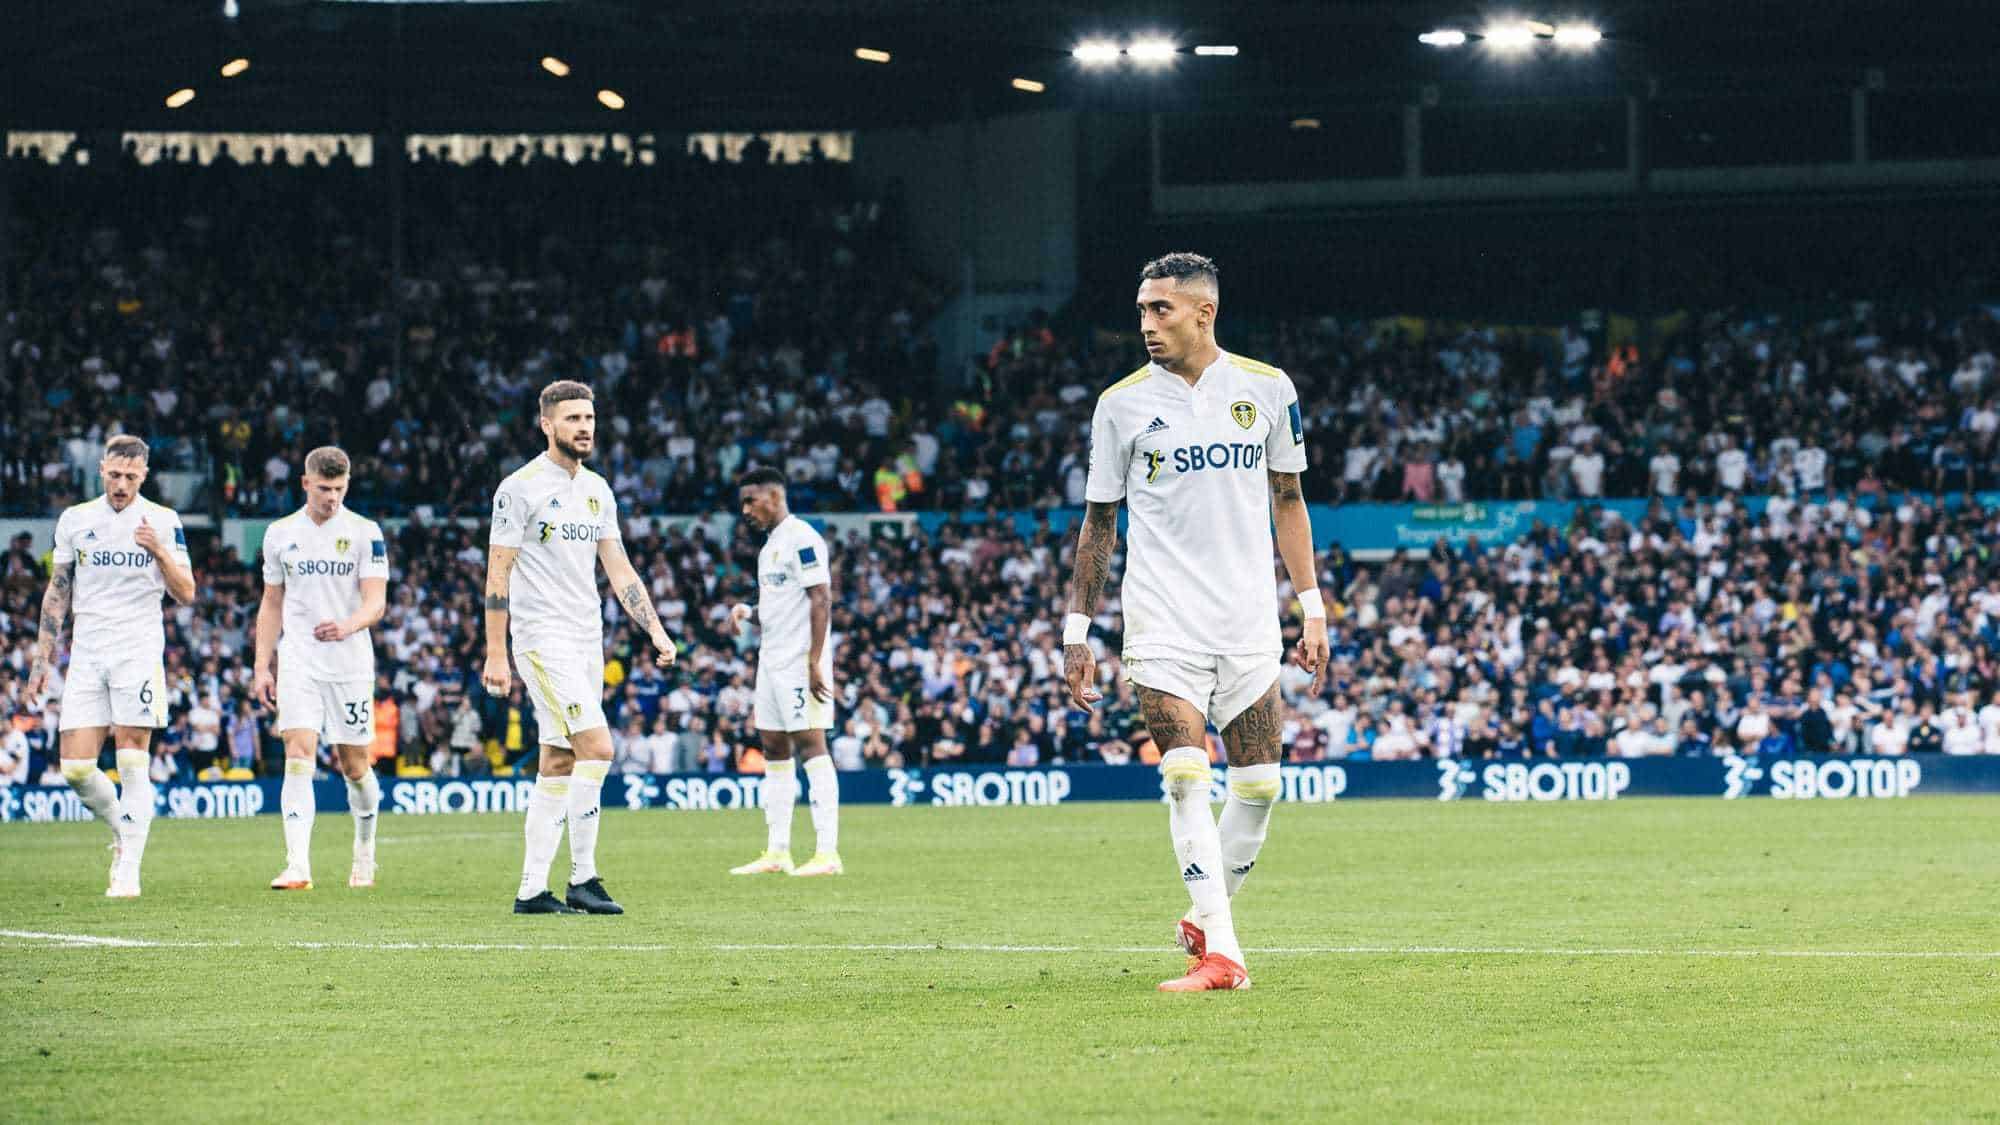 Raphinha looks absolutely fuming while a bunch of other Leeds players stand in the background, including Klich, who just missed that massive chance